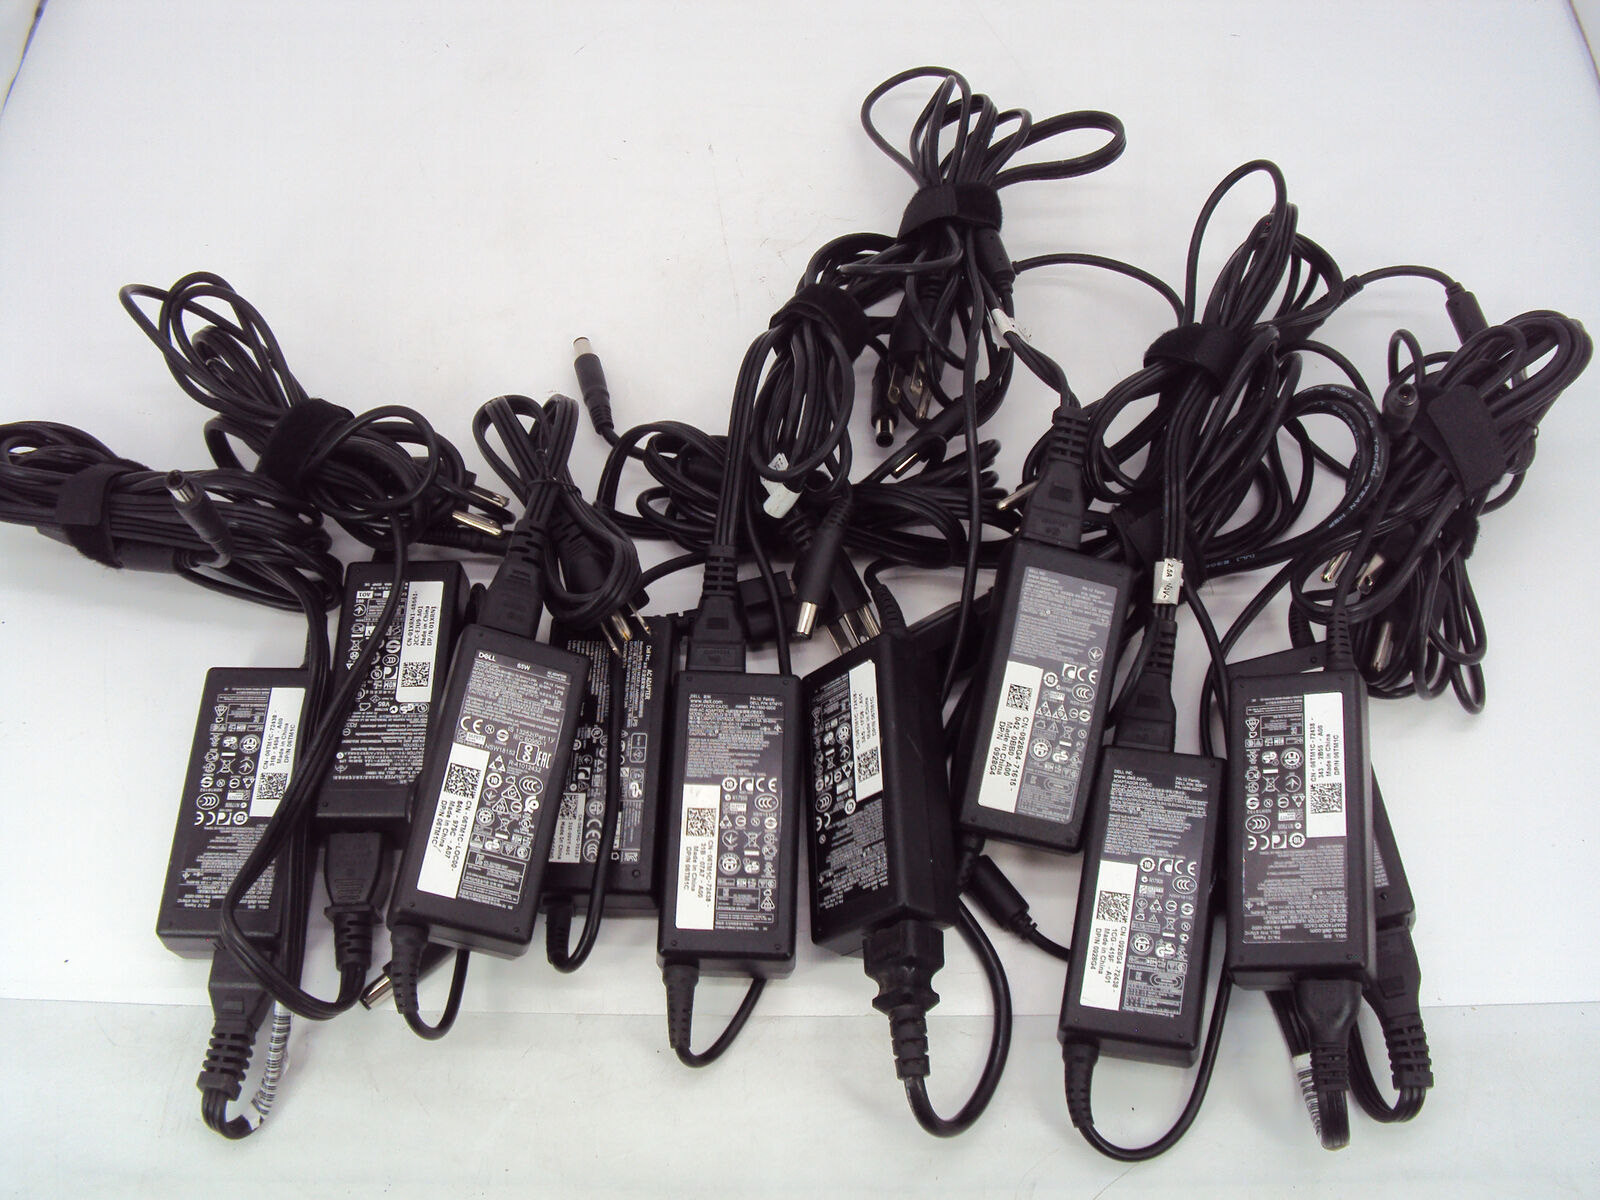 Lot of 10 Genuine Dell 19.5V 3.34A 65W PA-12 Power Supply Adapter 7.4mm/5.0mm Dell LA65NS2-01 HP-OQ065B83 DA65NM111-00 LA65NS0-00 FA065LS1-01